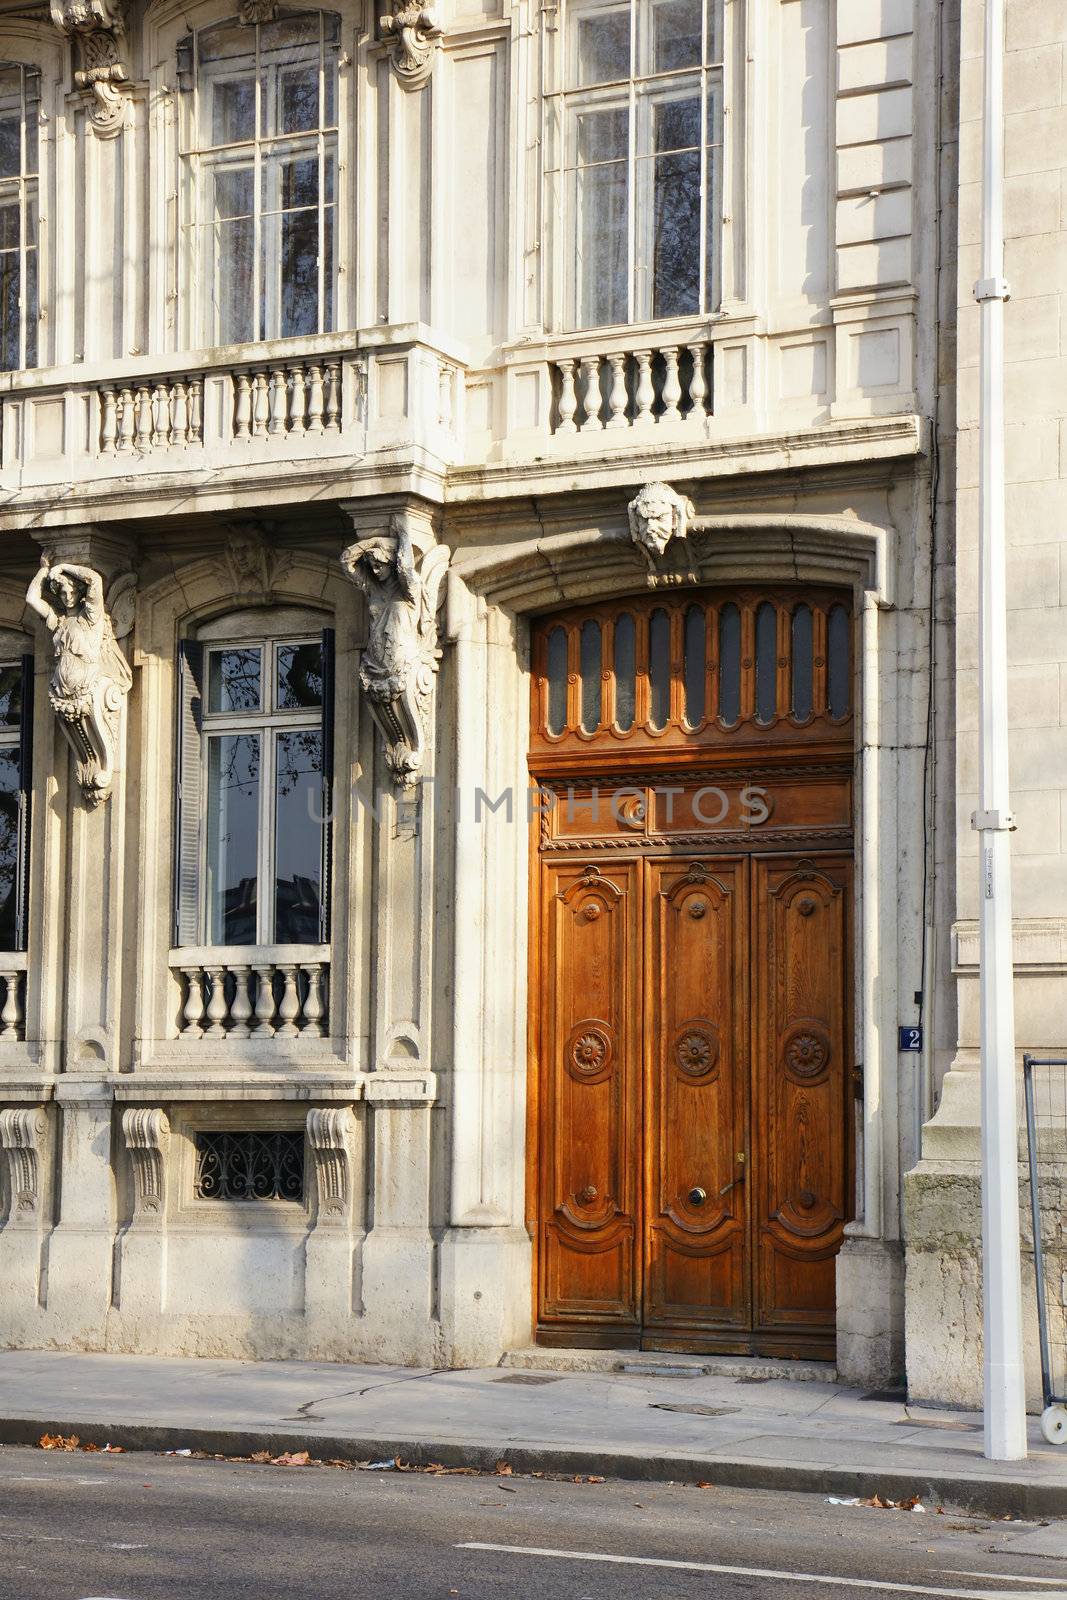 Beautiful wooden door of an old european apartment of flat stone building, with carved statues and balconies, Lyon, France.